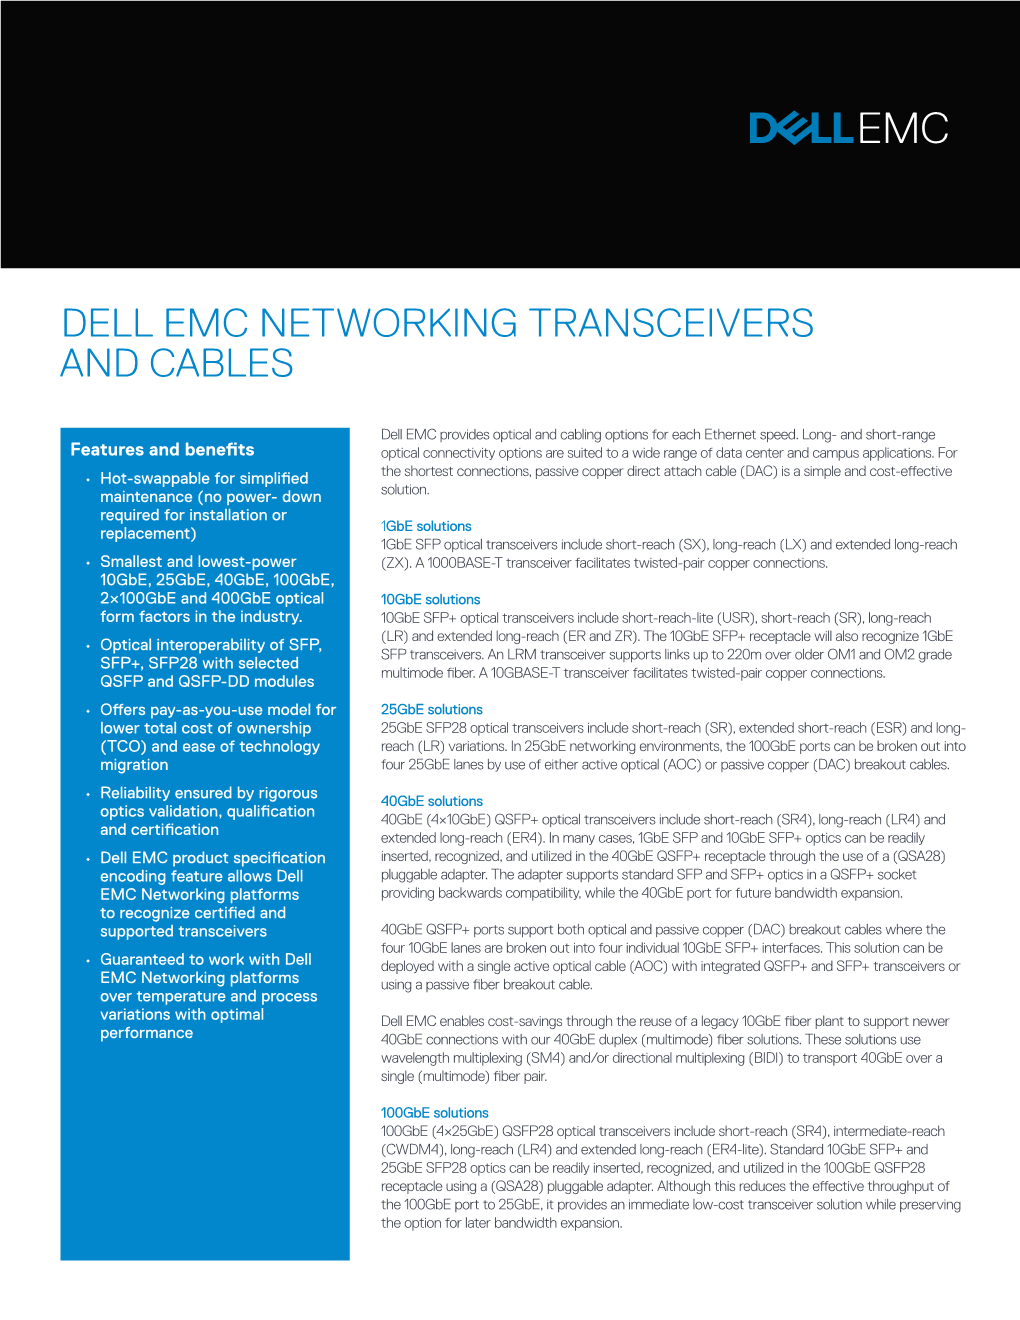 Dell Emc Networking Transceivers and Cables